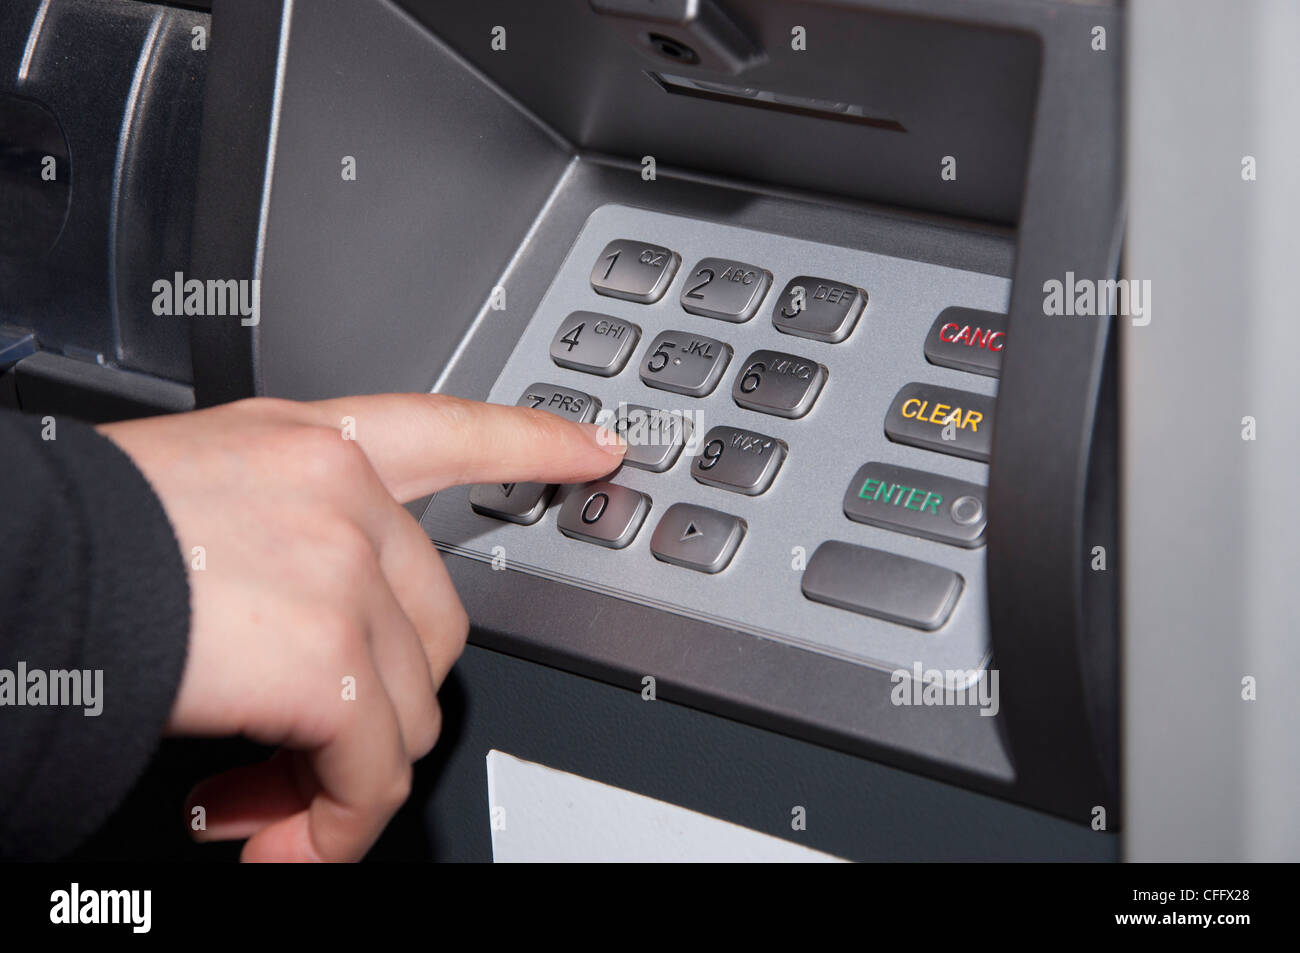 Someone pressing number button on ATM machine Stock Photo